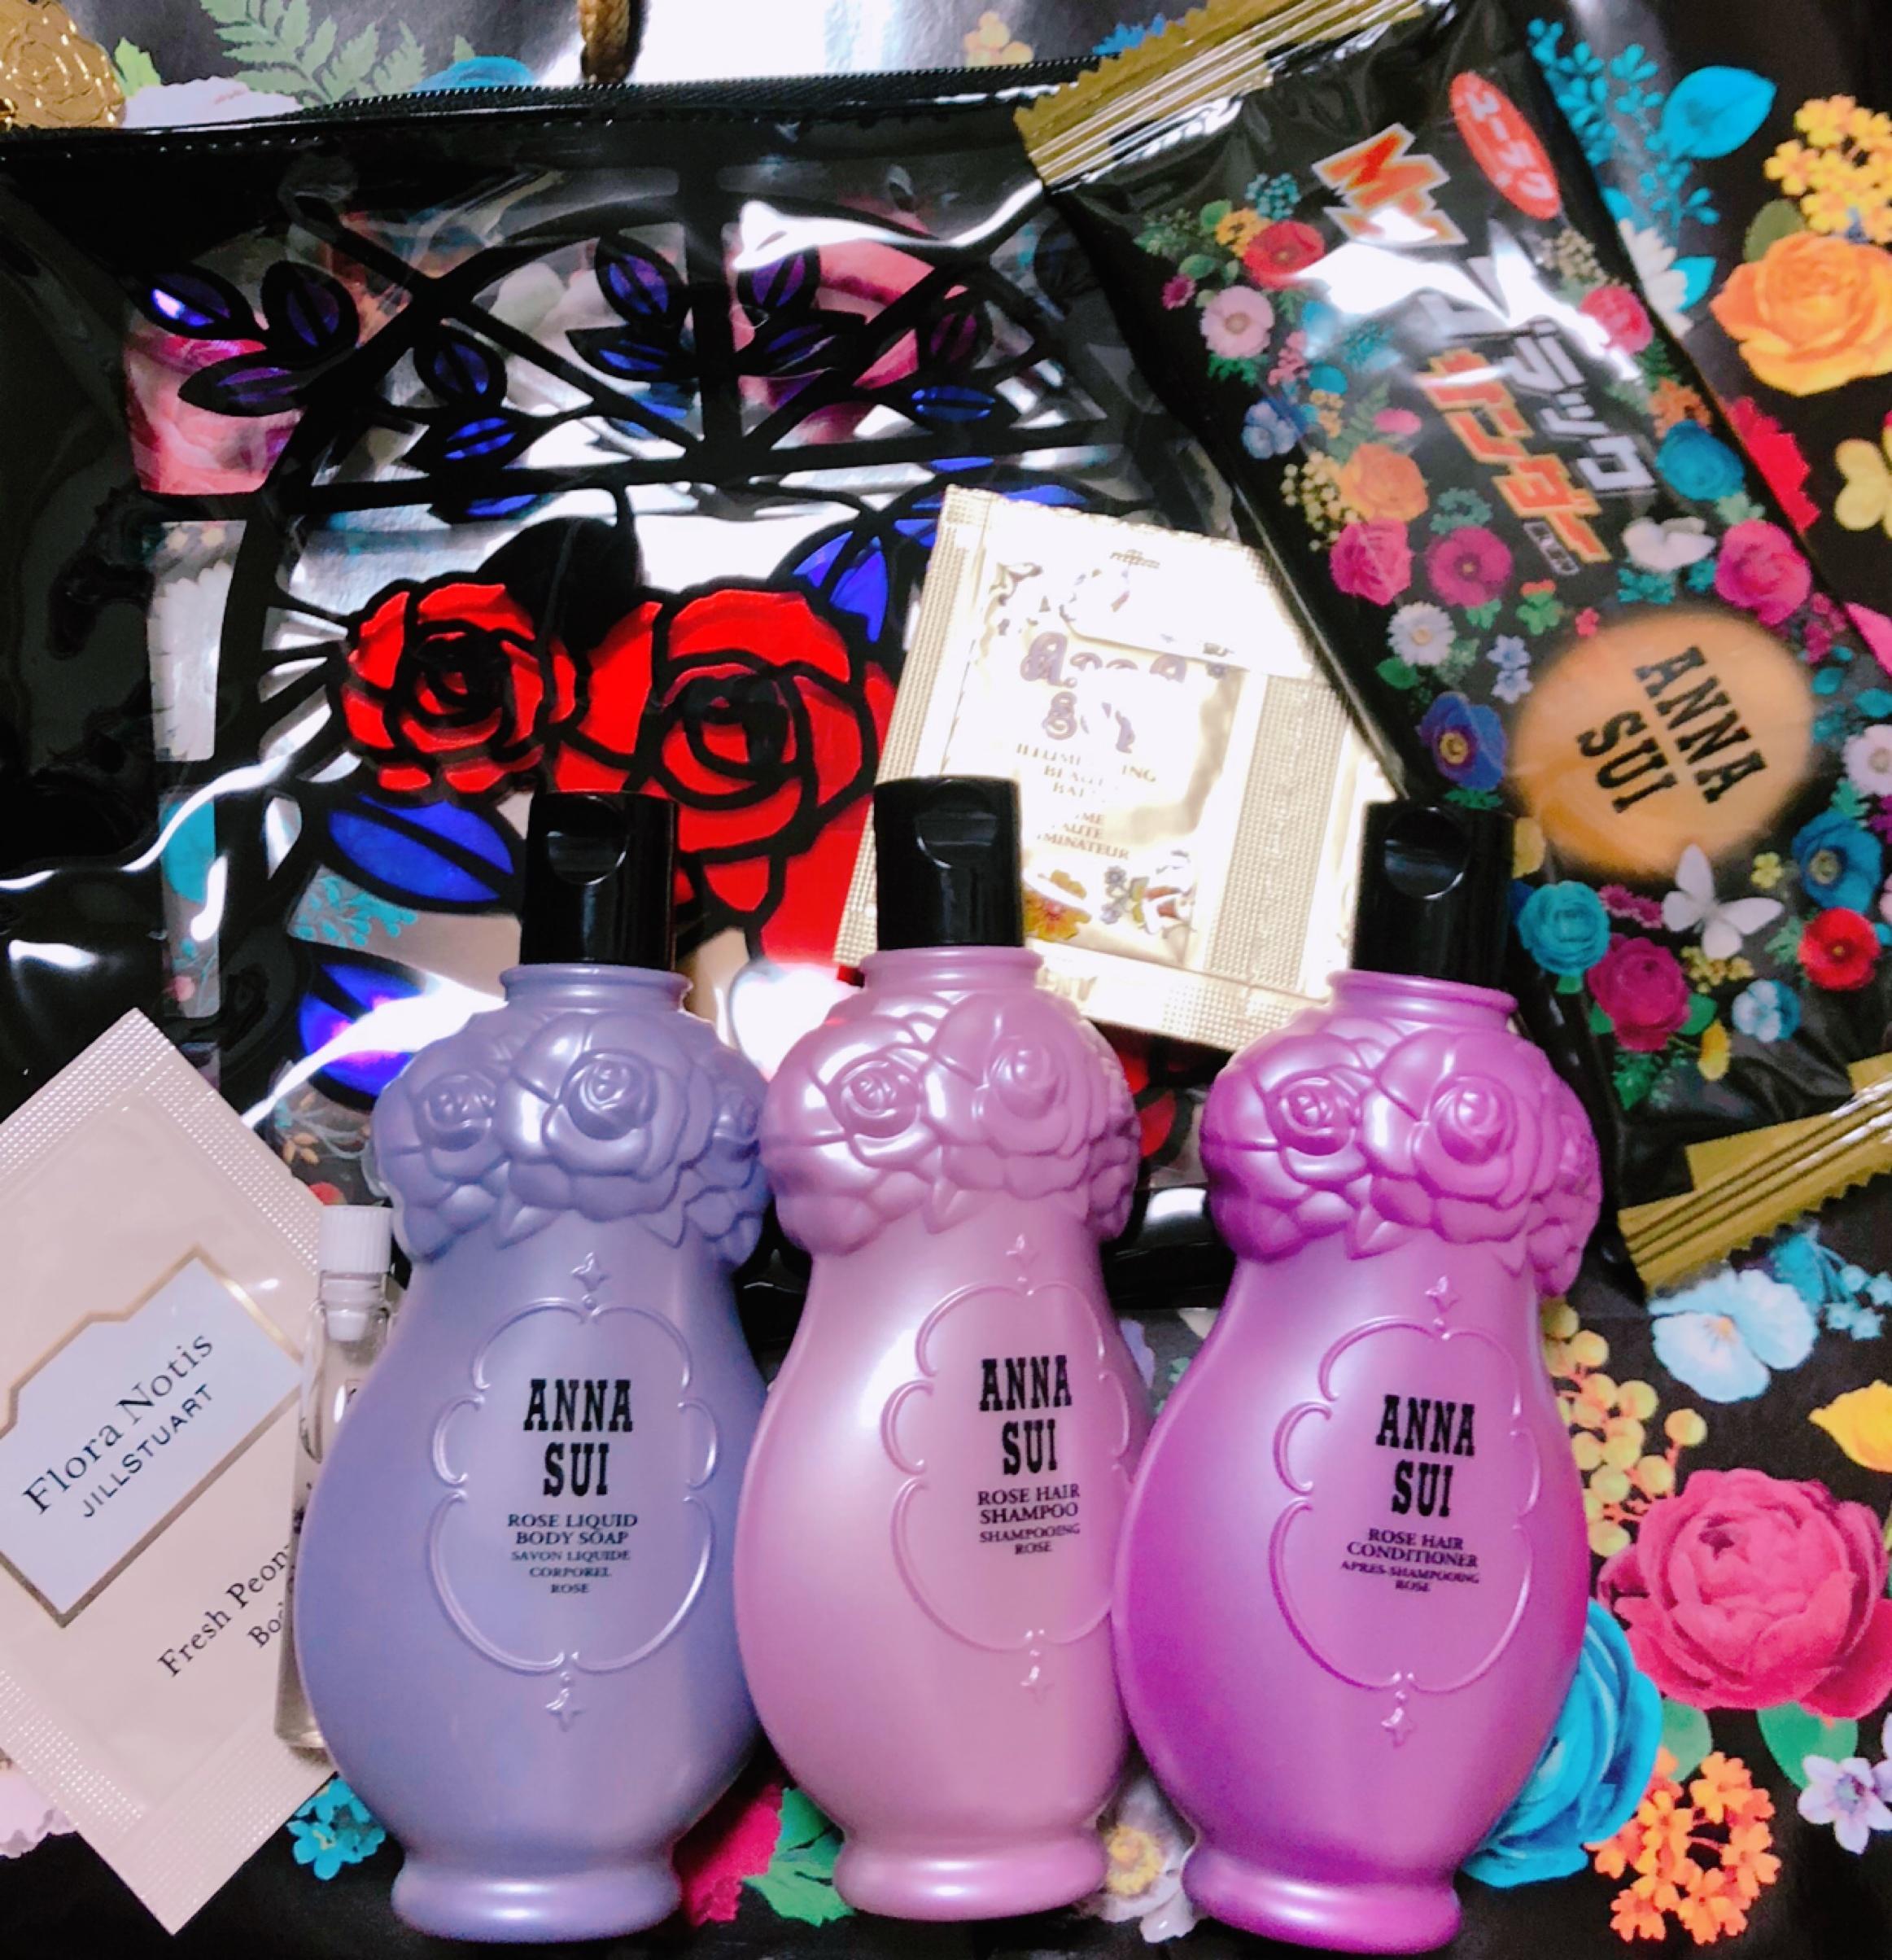 ANNA SUI トラベル小物セット 9点 最大60％オフ！ - 快適グッズ・旅行小物